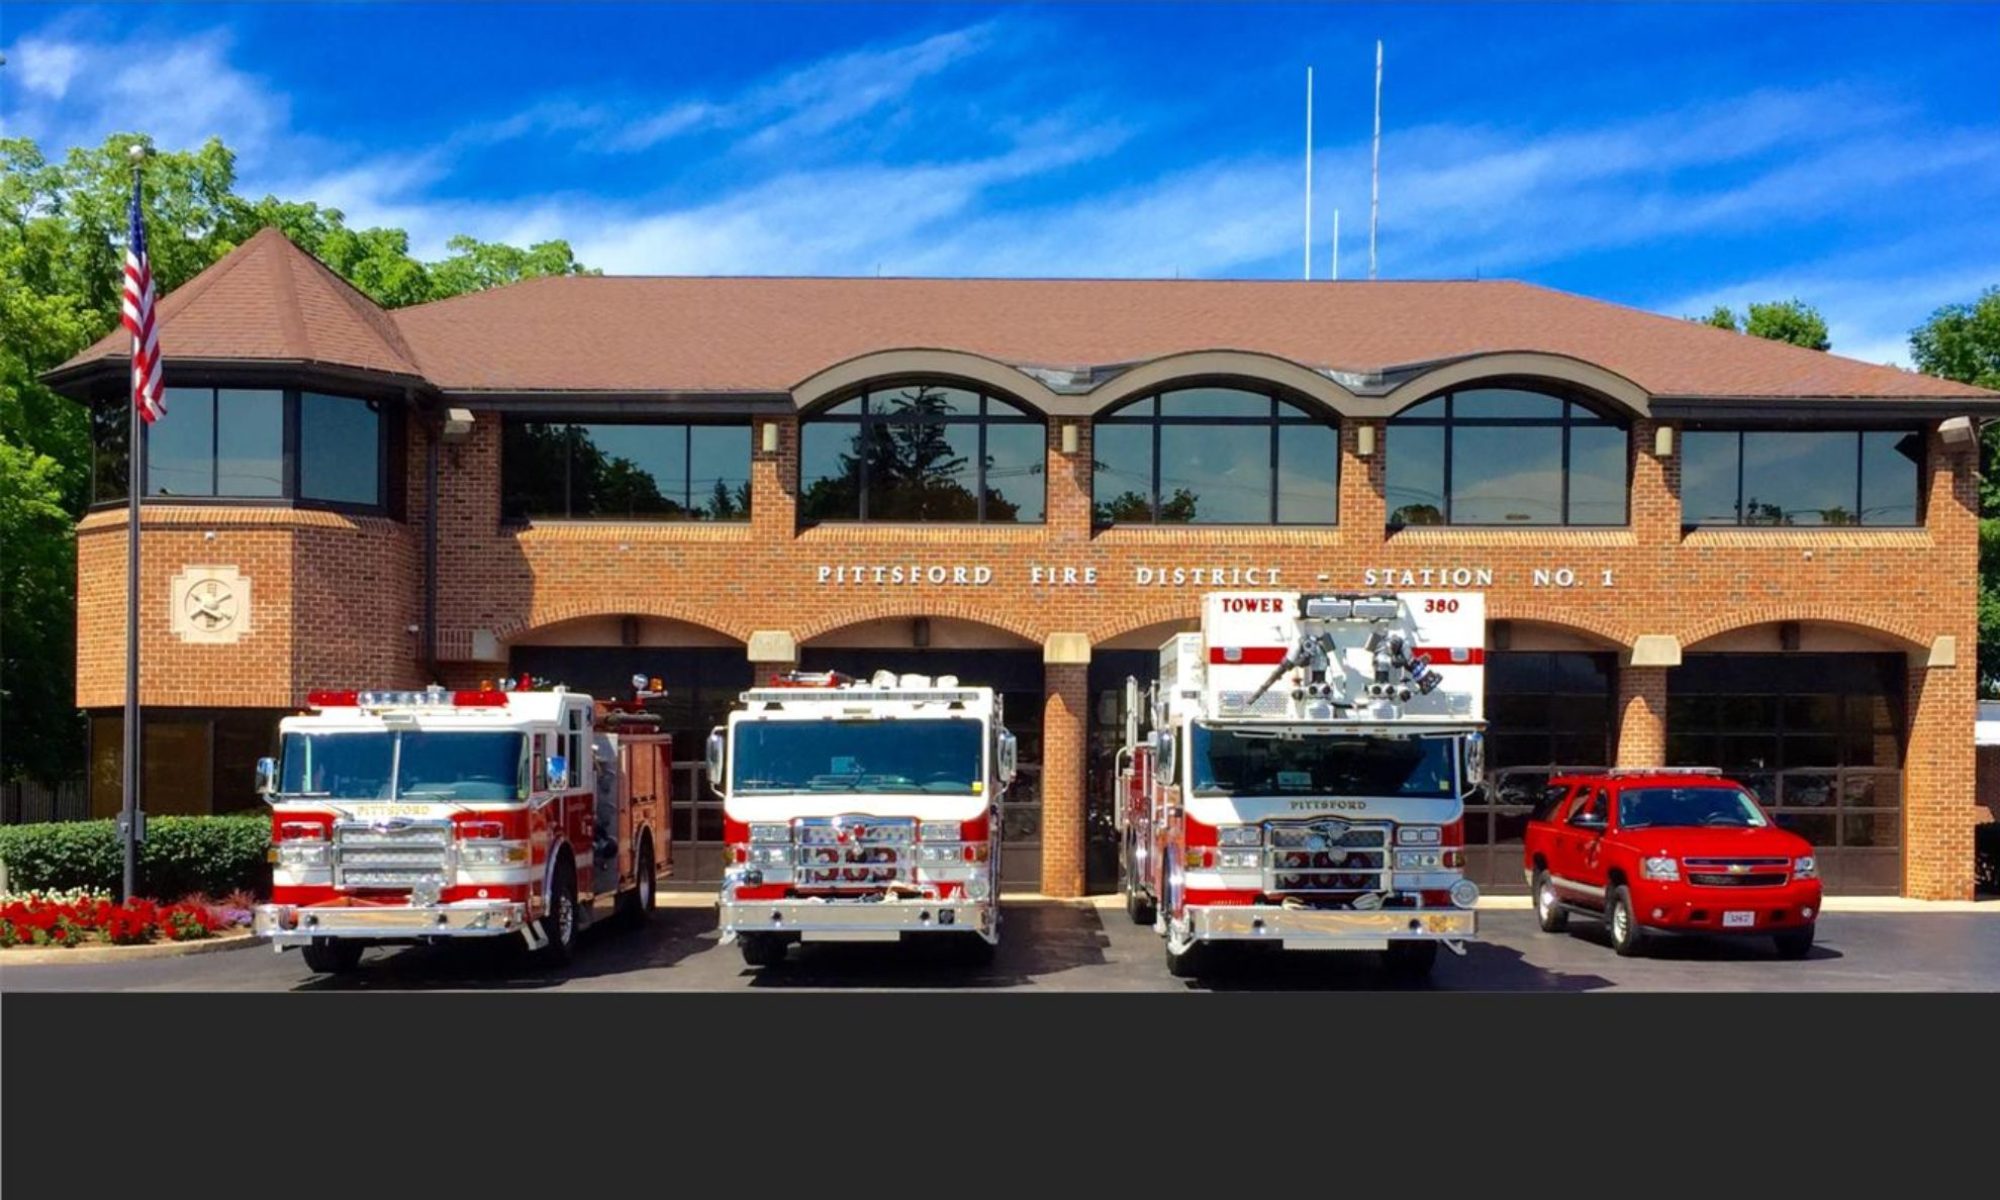 Pittsford Fire District